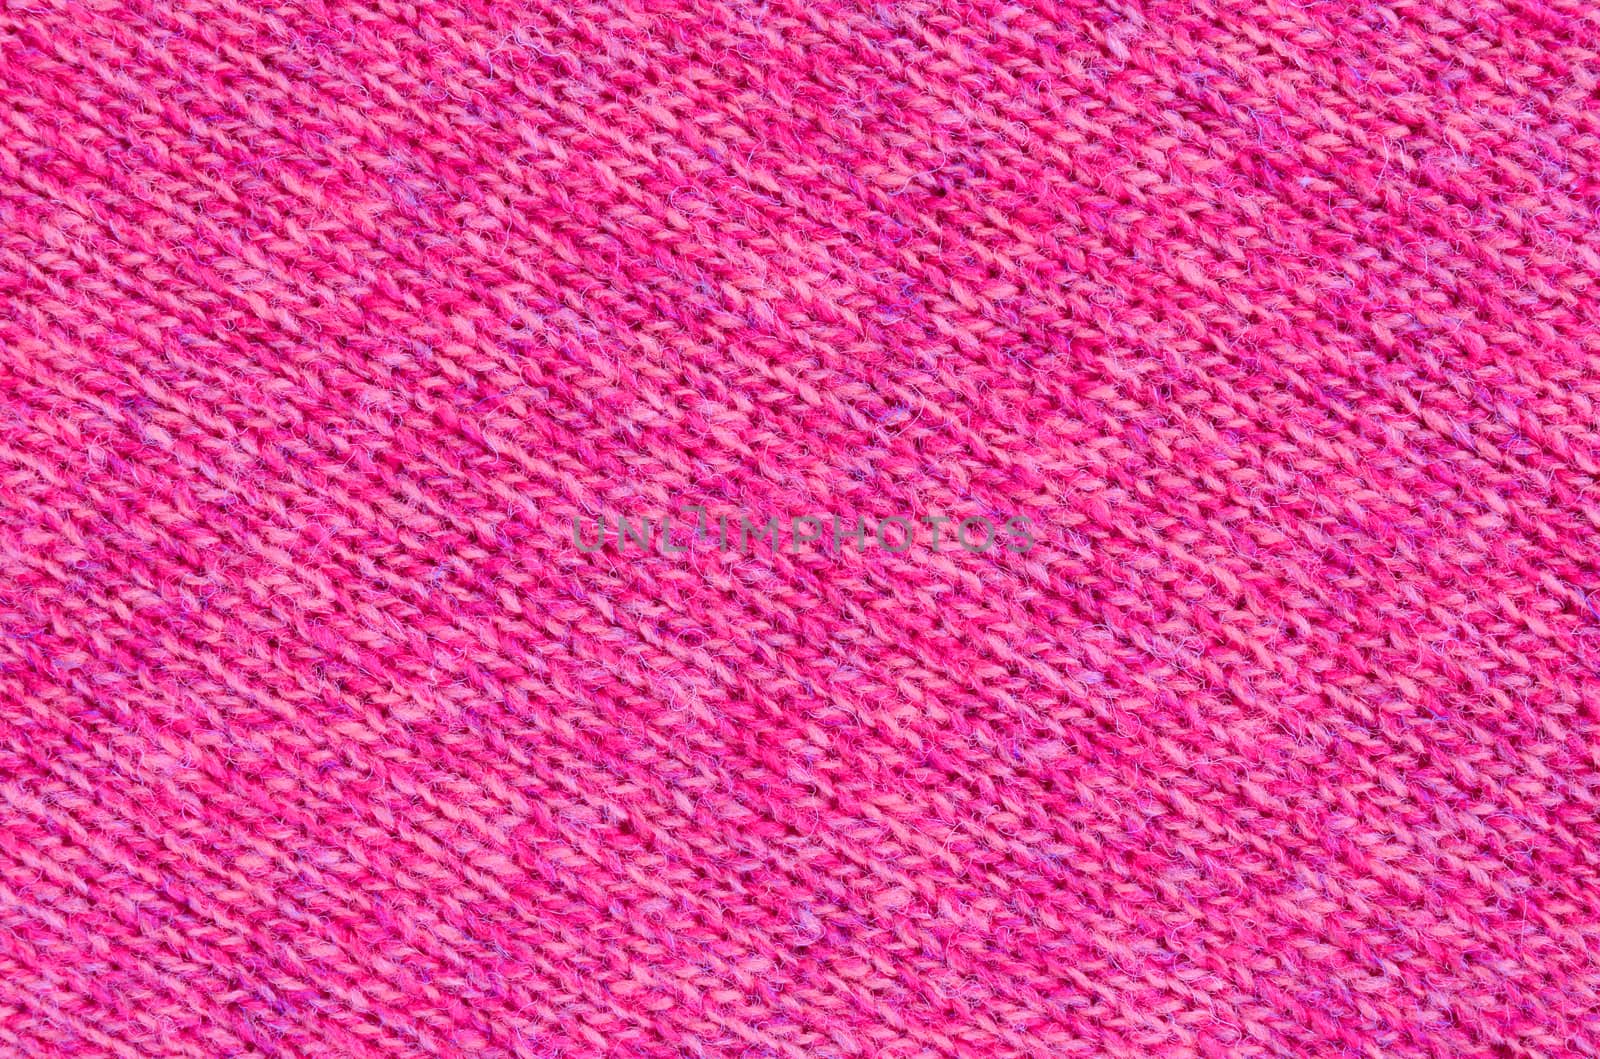 Abstract Background Texture Of Knitted Pink Wool Fabric